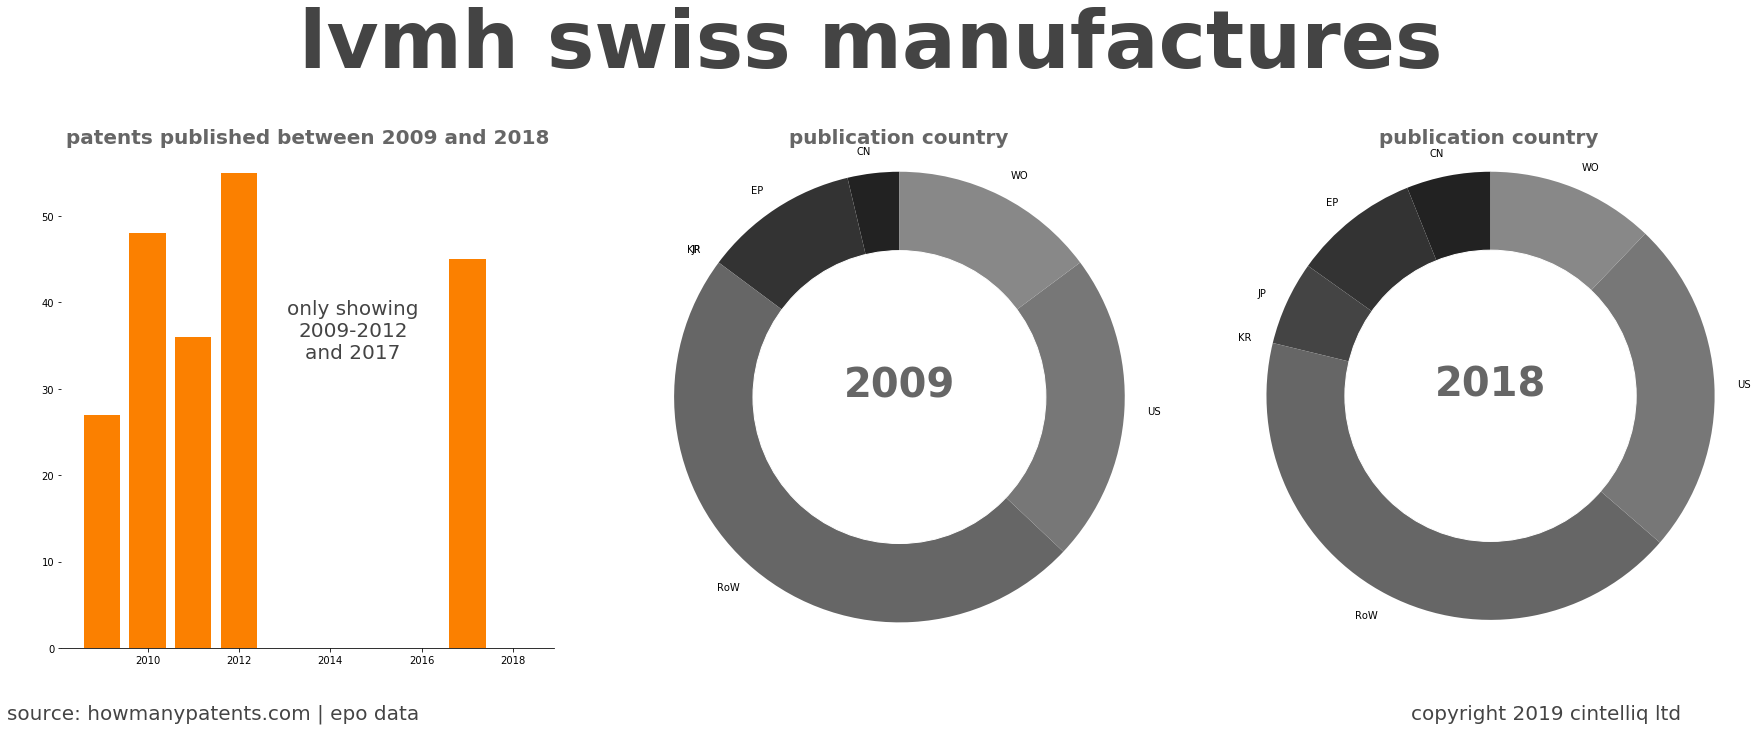 summary of patents for Lvmh Swiss Manufactures